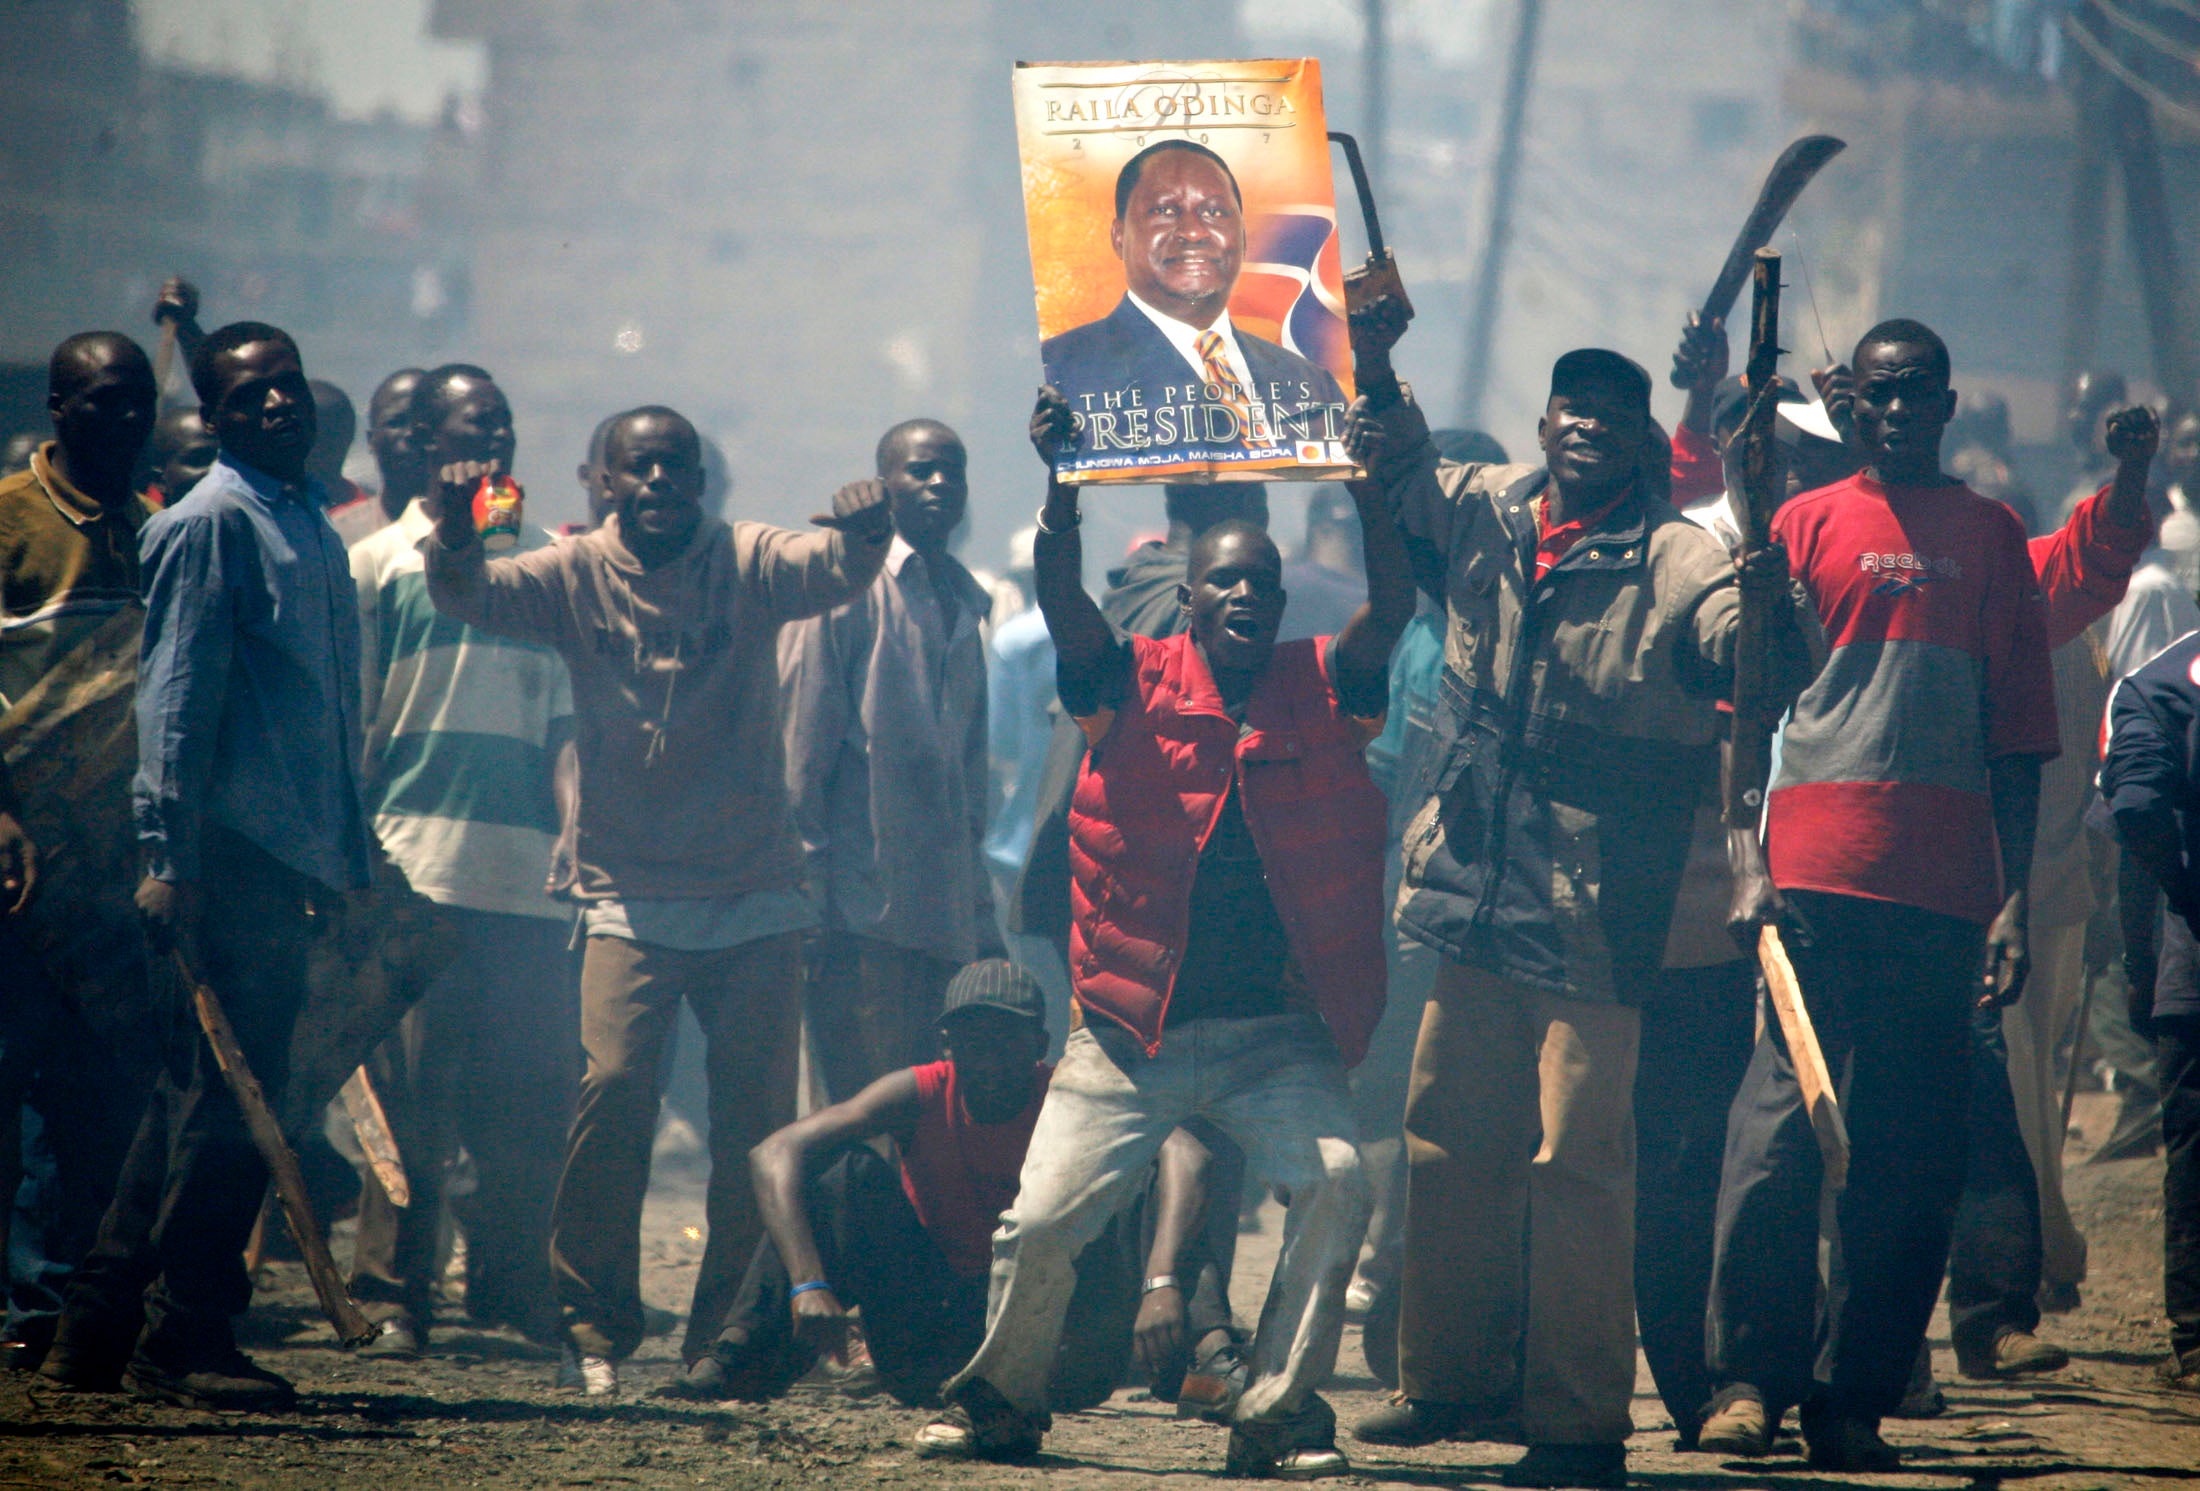 Supporters of Mr Odinga start to protest corrupt elections during 2008 in a conflict which brought the country to the brink of civil war